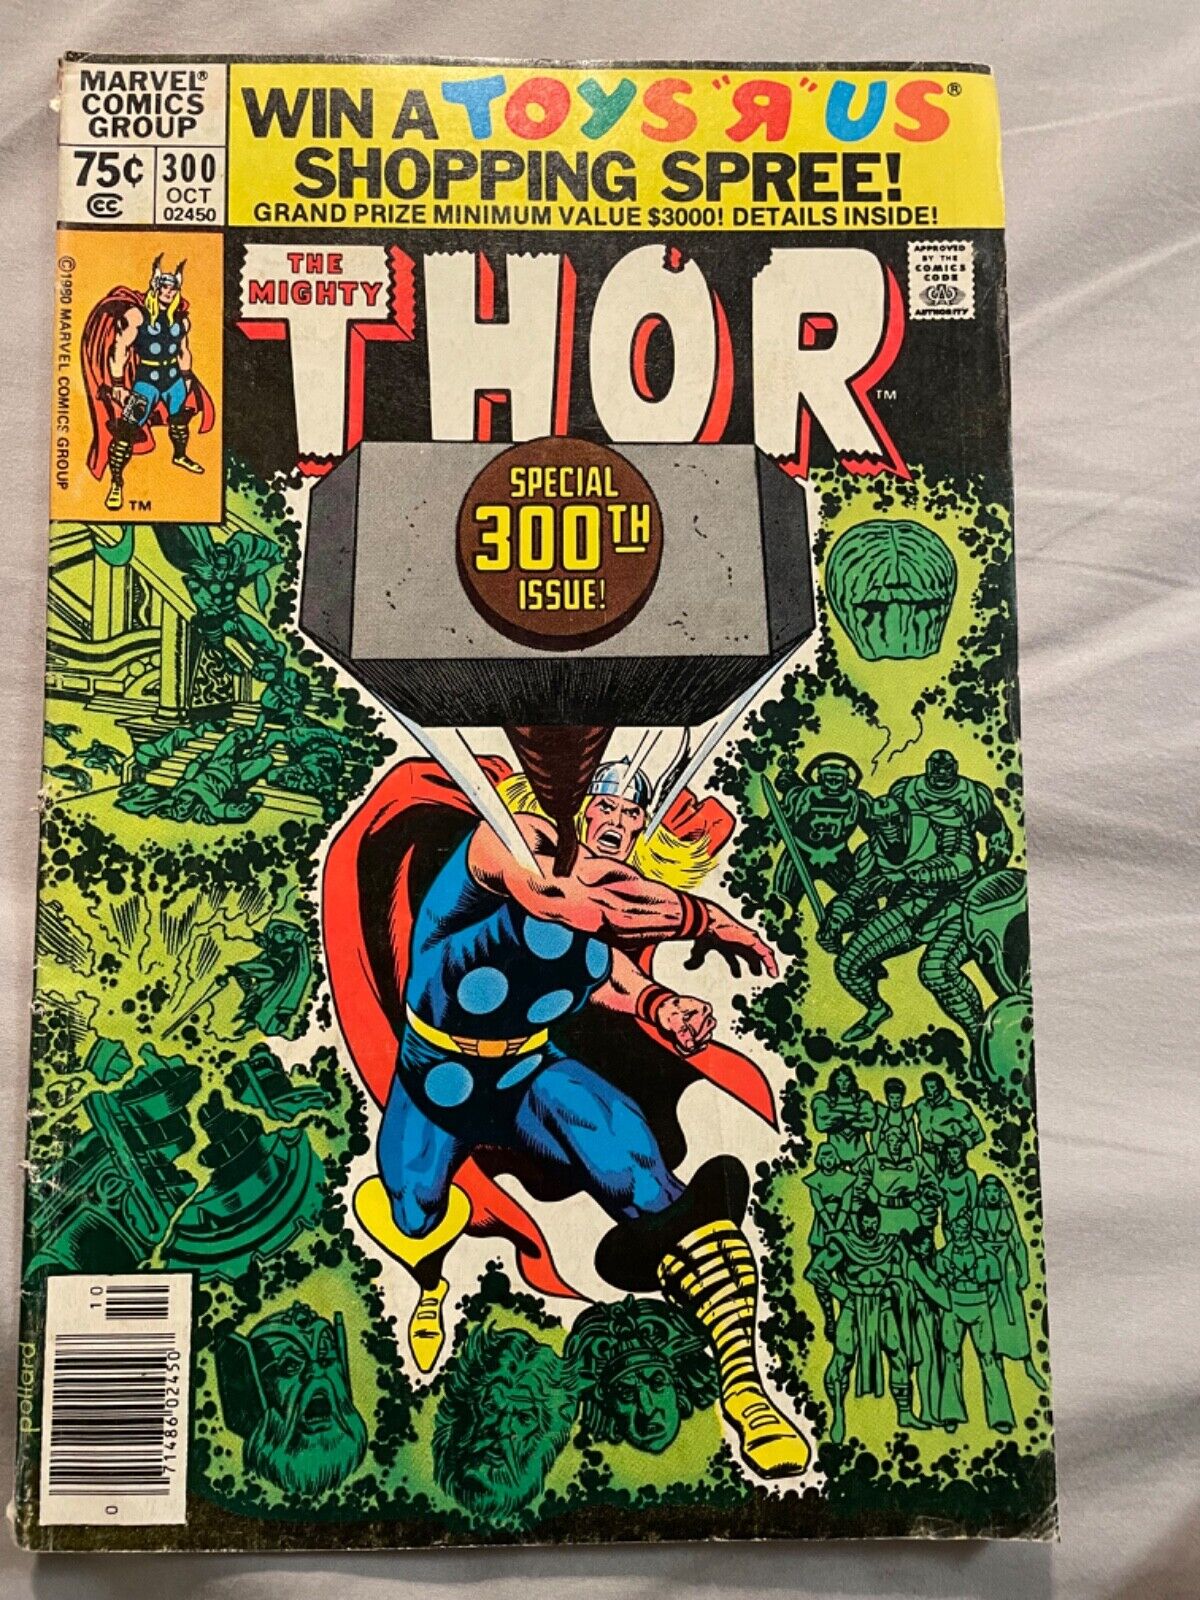 THOR 300 specal issue 1966 comic book good condition 